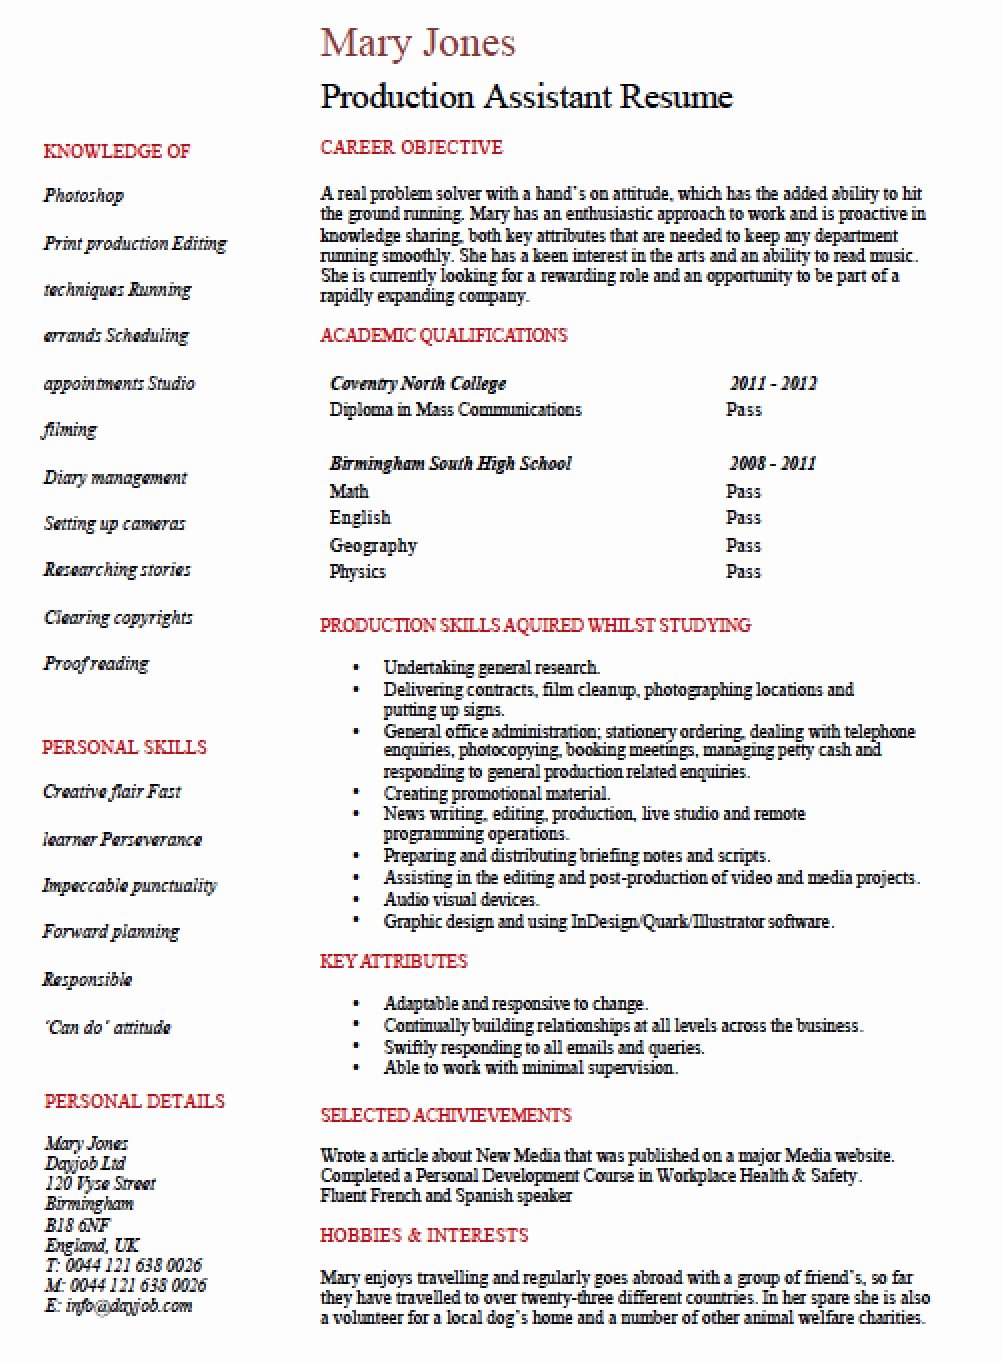 Production assistant Resume Examples Awesome Free Entry Level Production assistant Resume Template